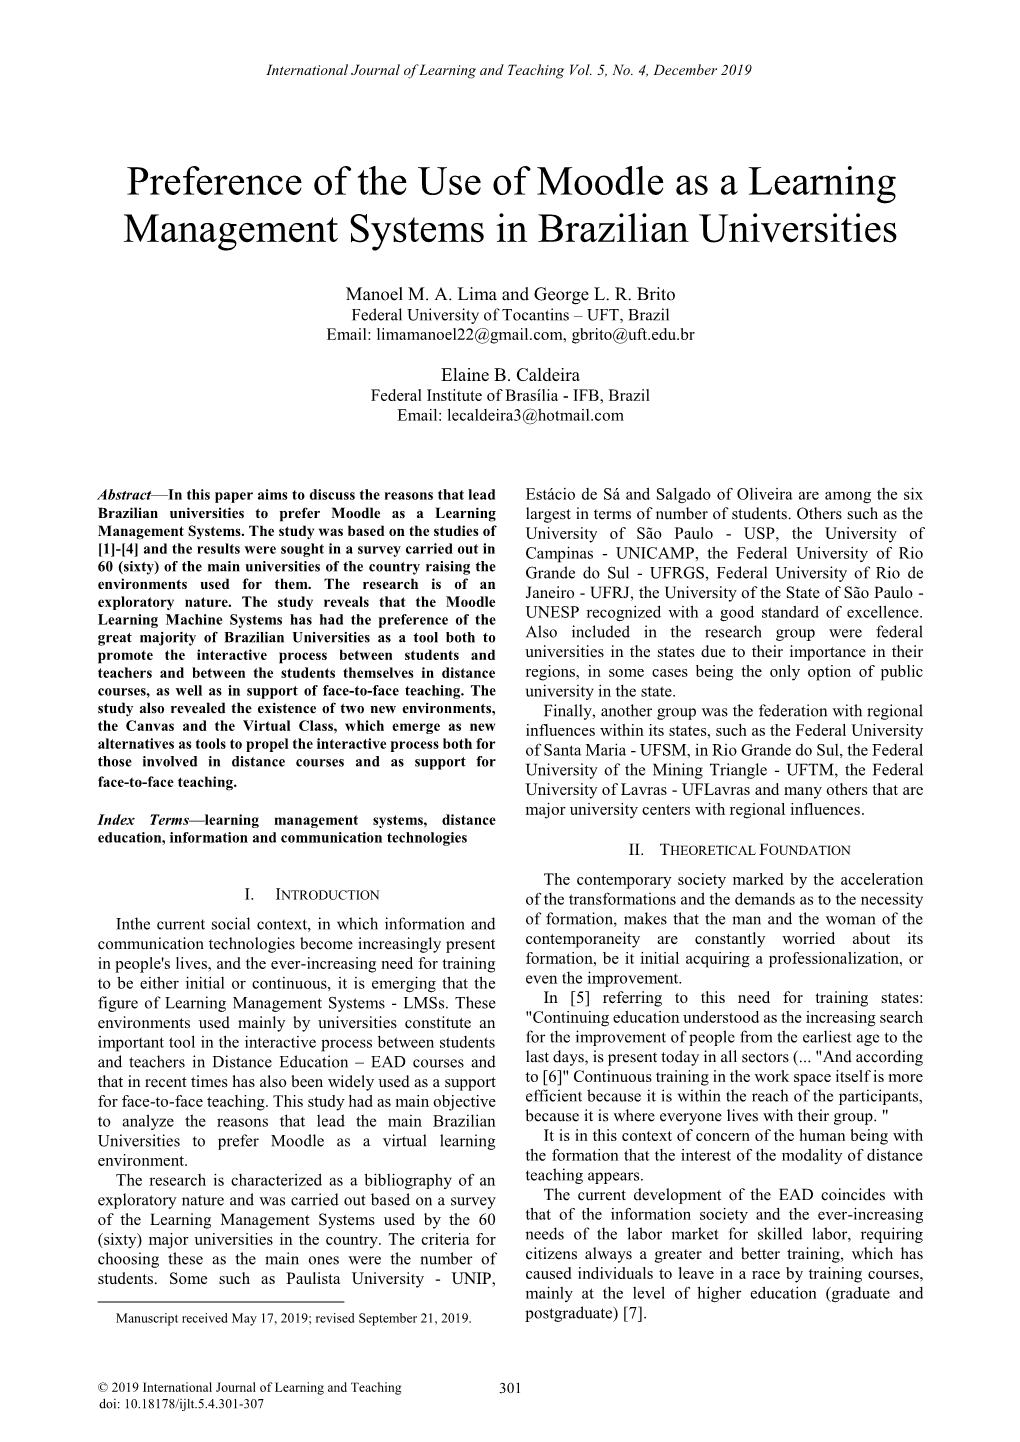 Management Systems in Brazilian Universities Preference of the Use